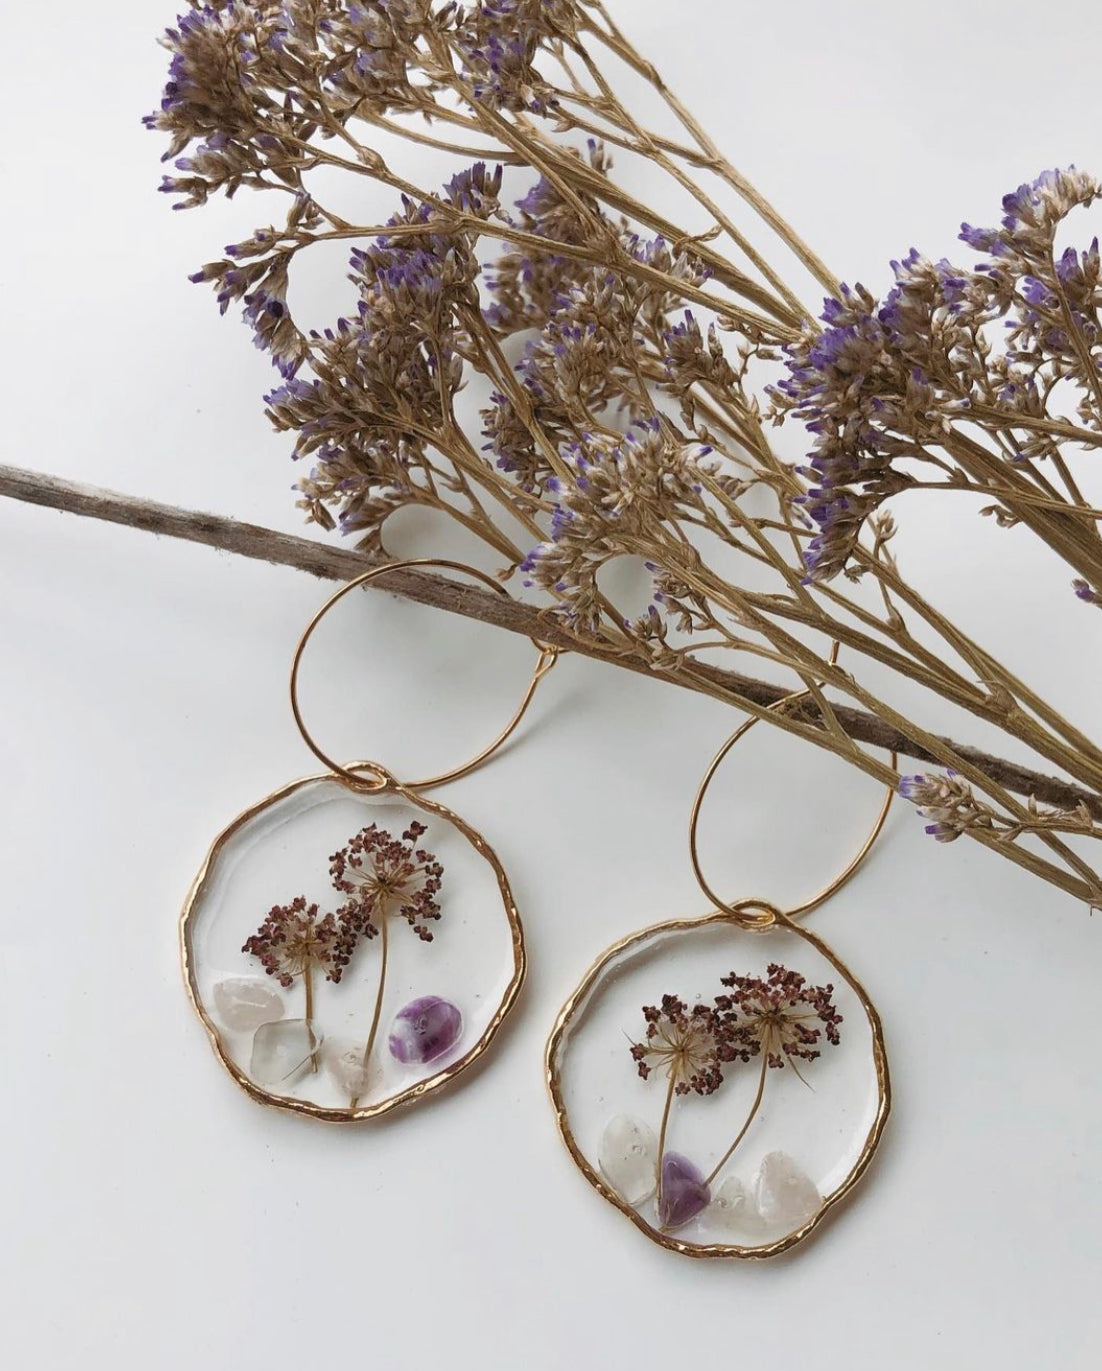 Pressed Purple Flowers with Crystals